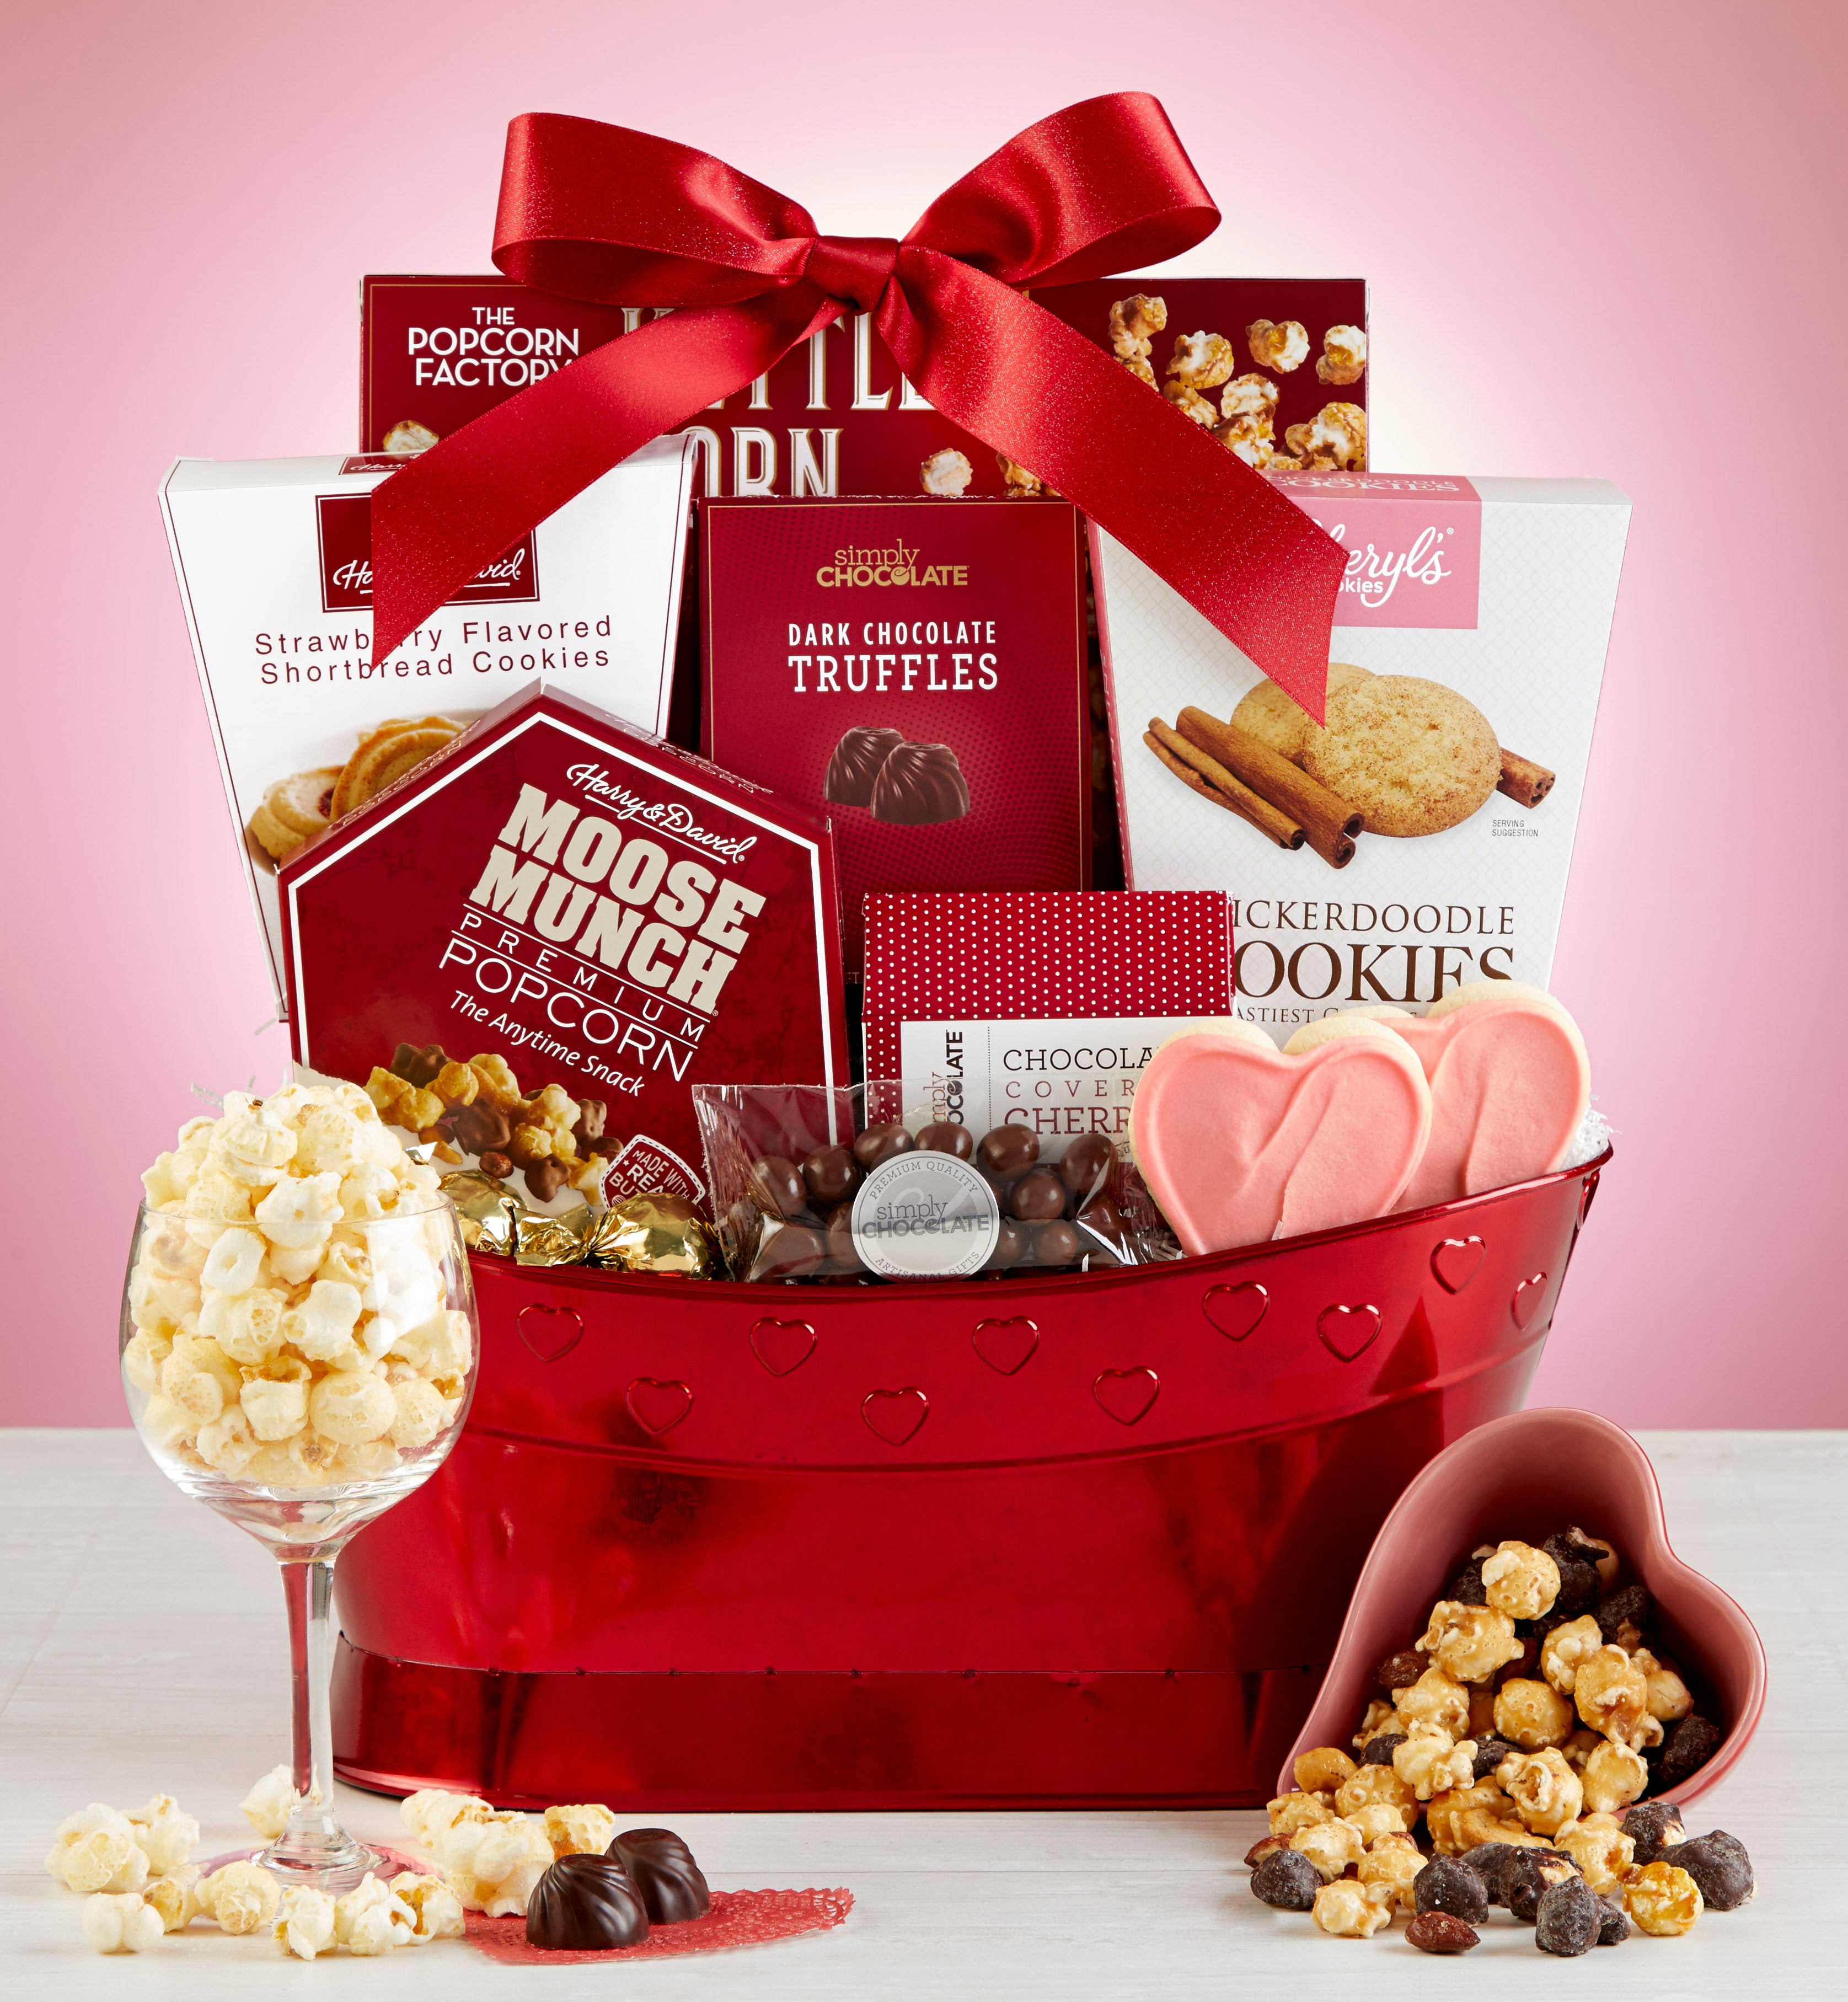 Romantic Gifts for Him & Her | Romantic Gift Baskets | 1-800-Baskets